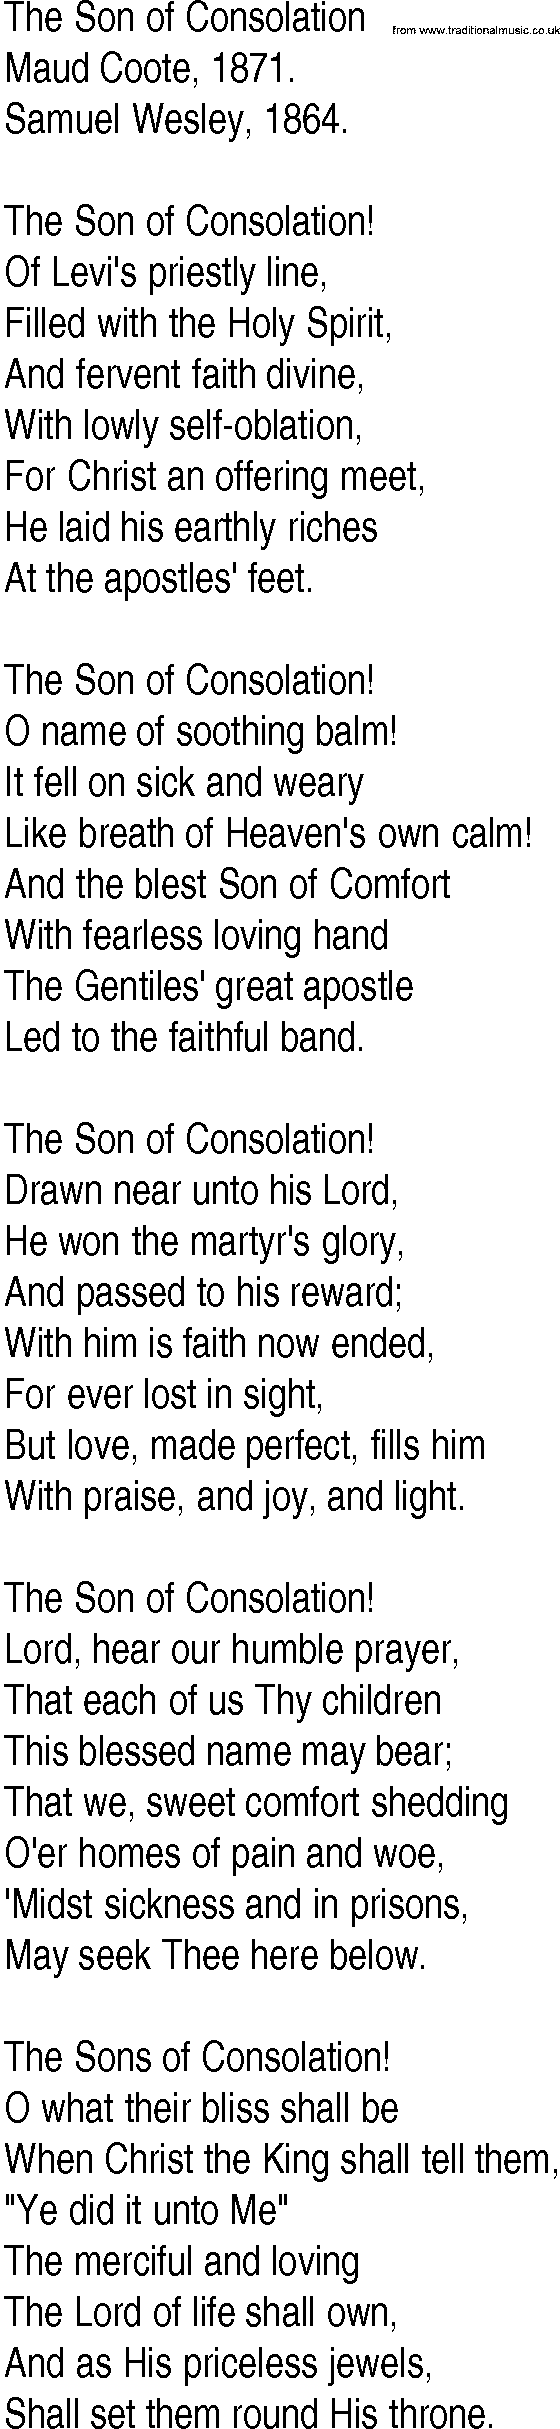 Hymn and Gospel Song: The Son of Consolation by Maud Coote lyrics